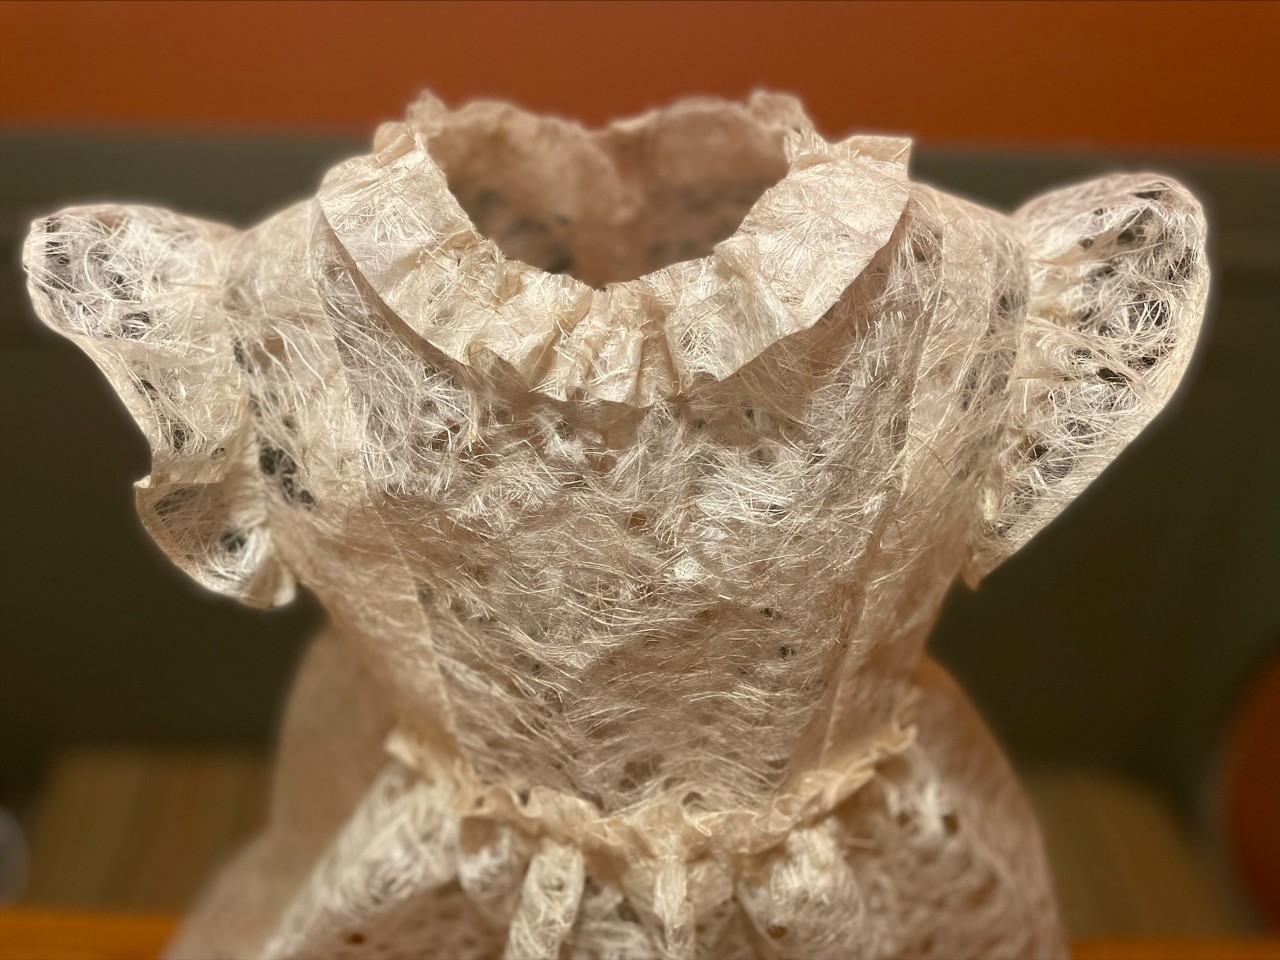 Child's dress showing waist, bodice, collar and sleeves; looks made of lace, but it is made of paper